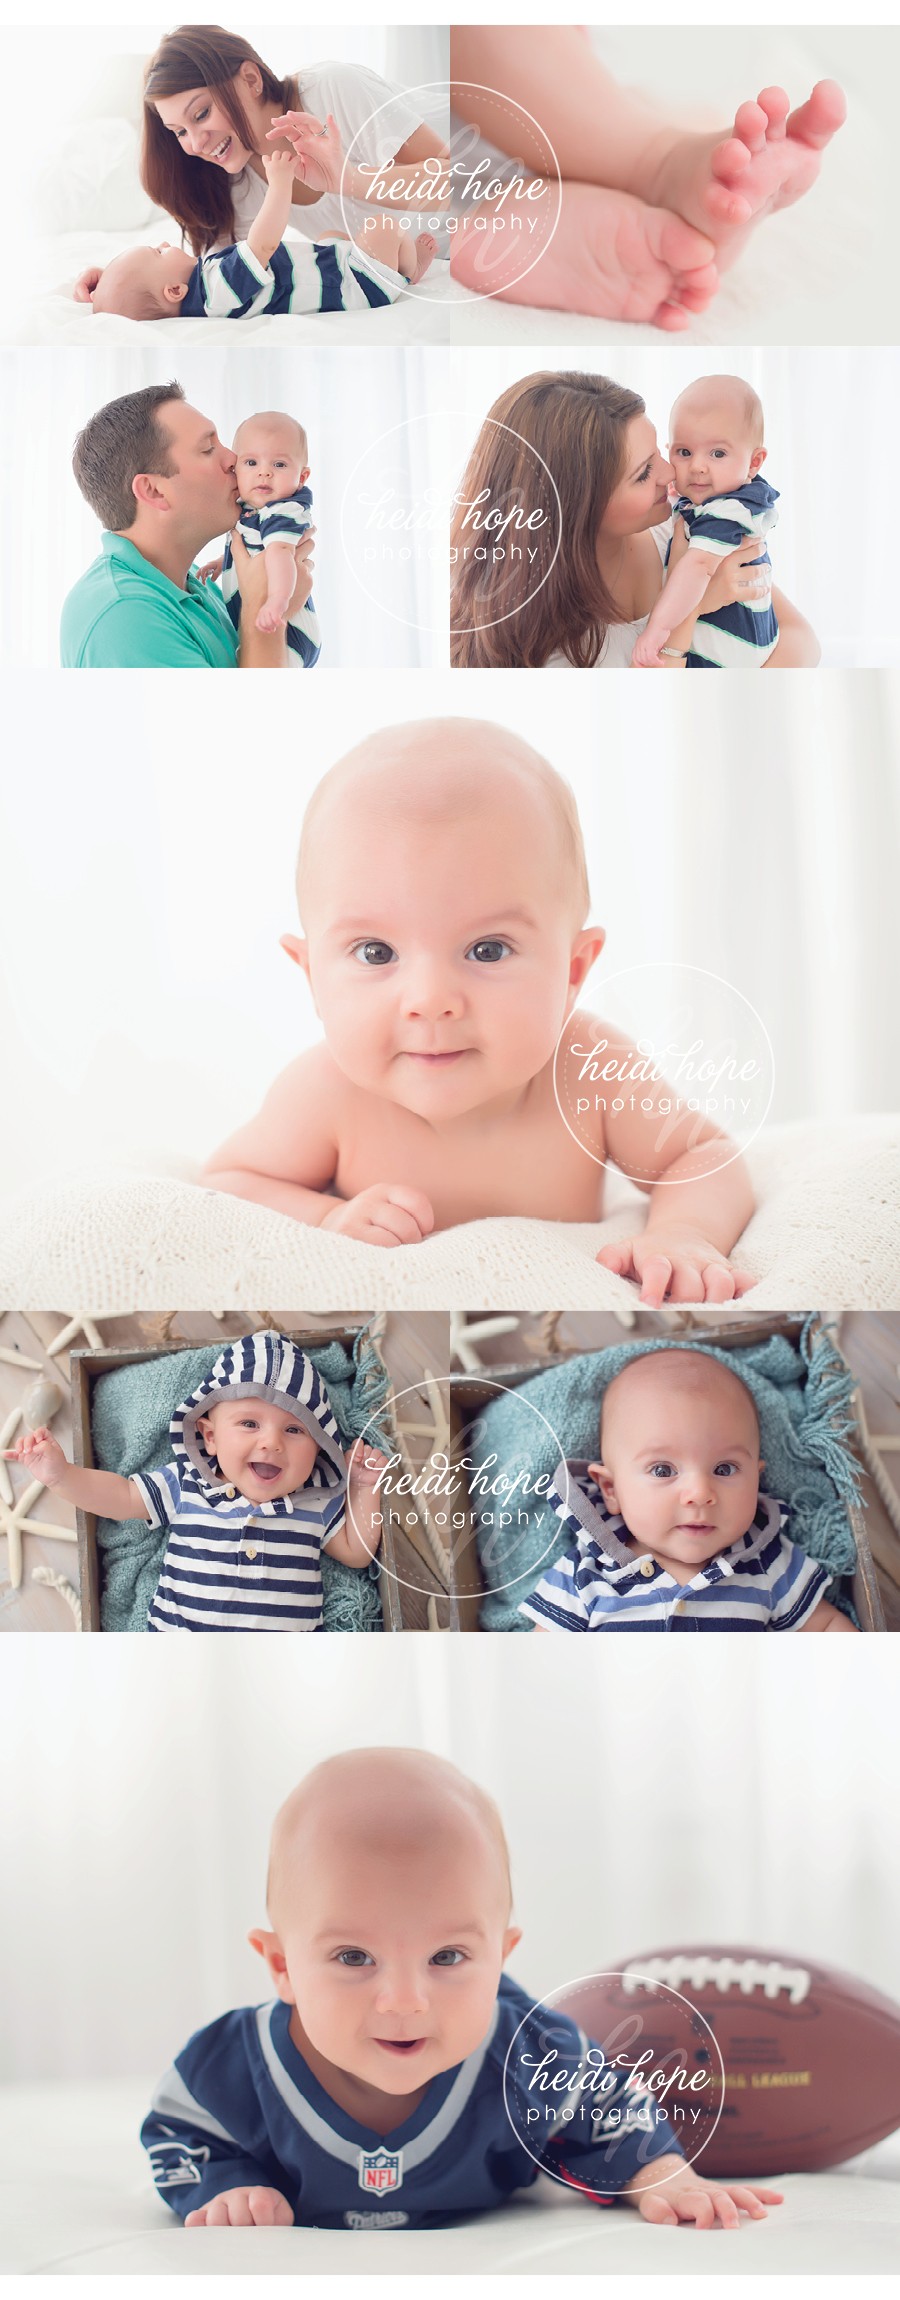 Baby B’s 3 month shoot at the studio!